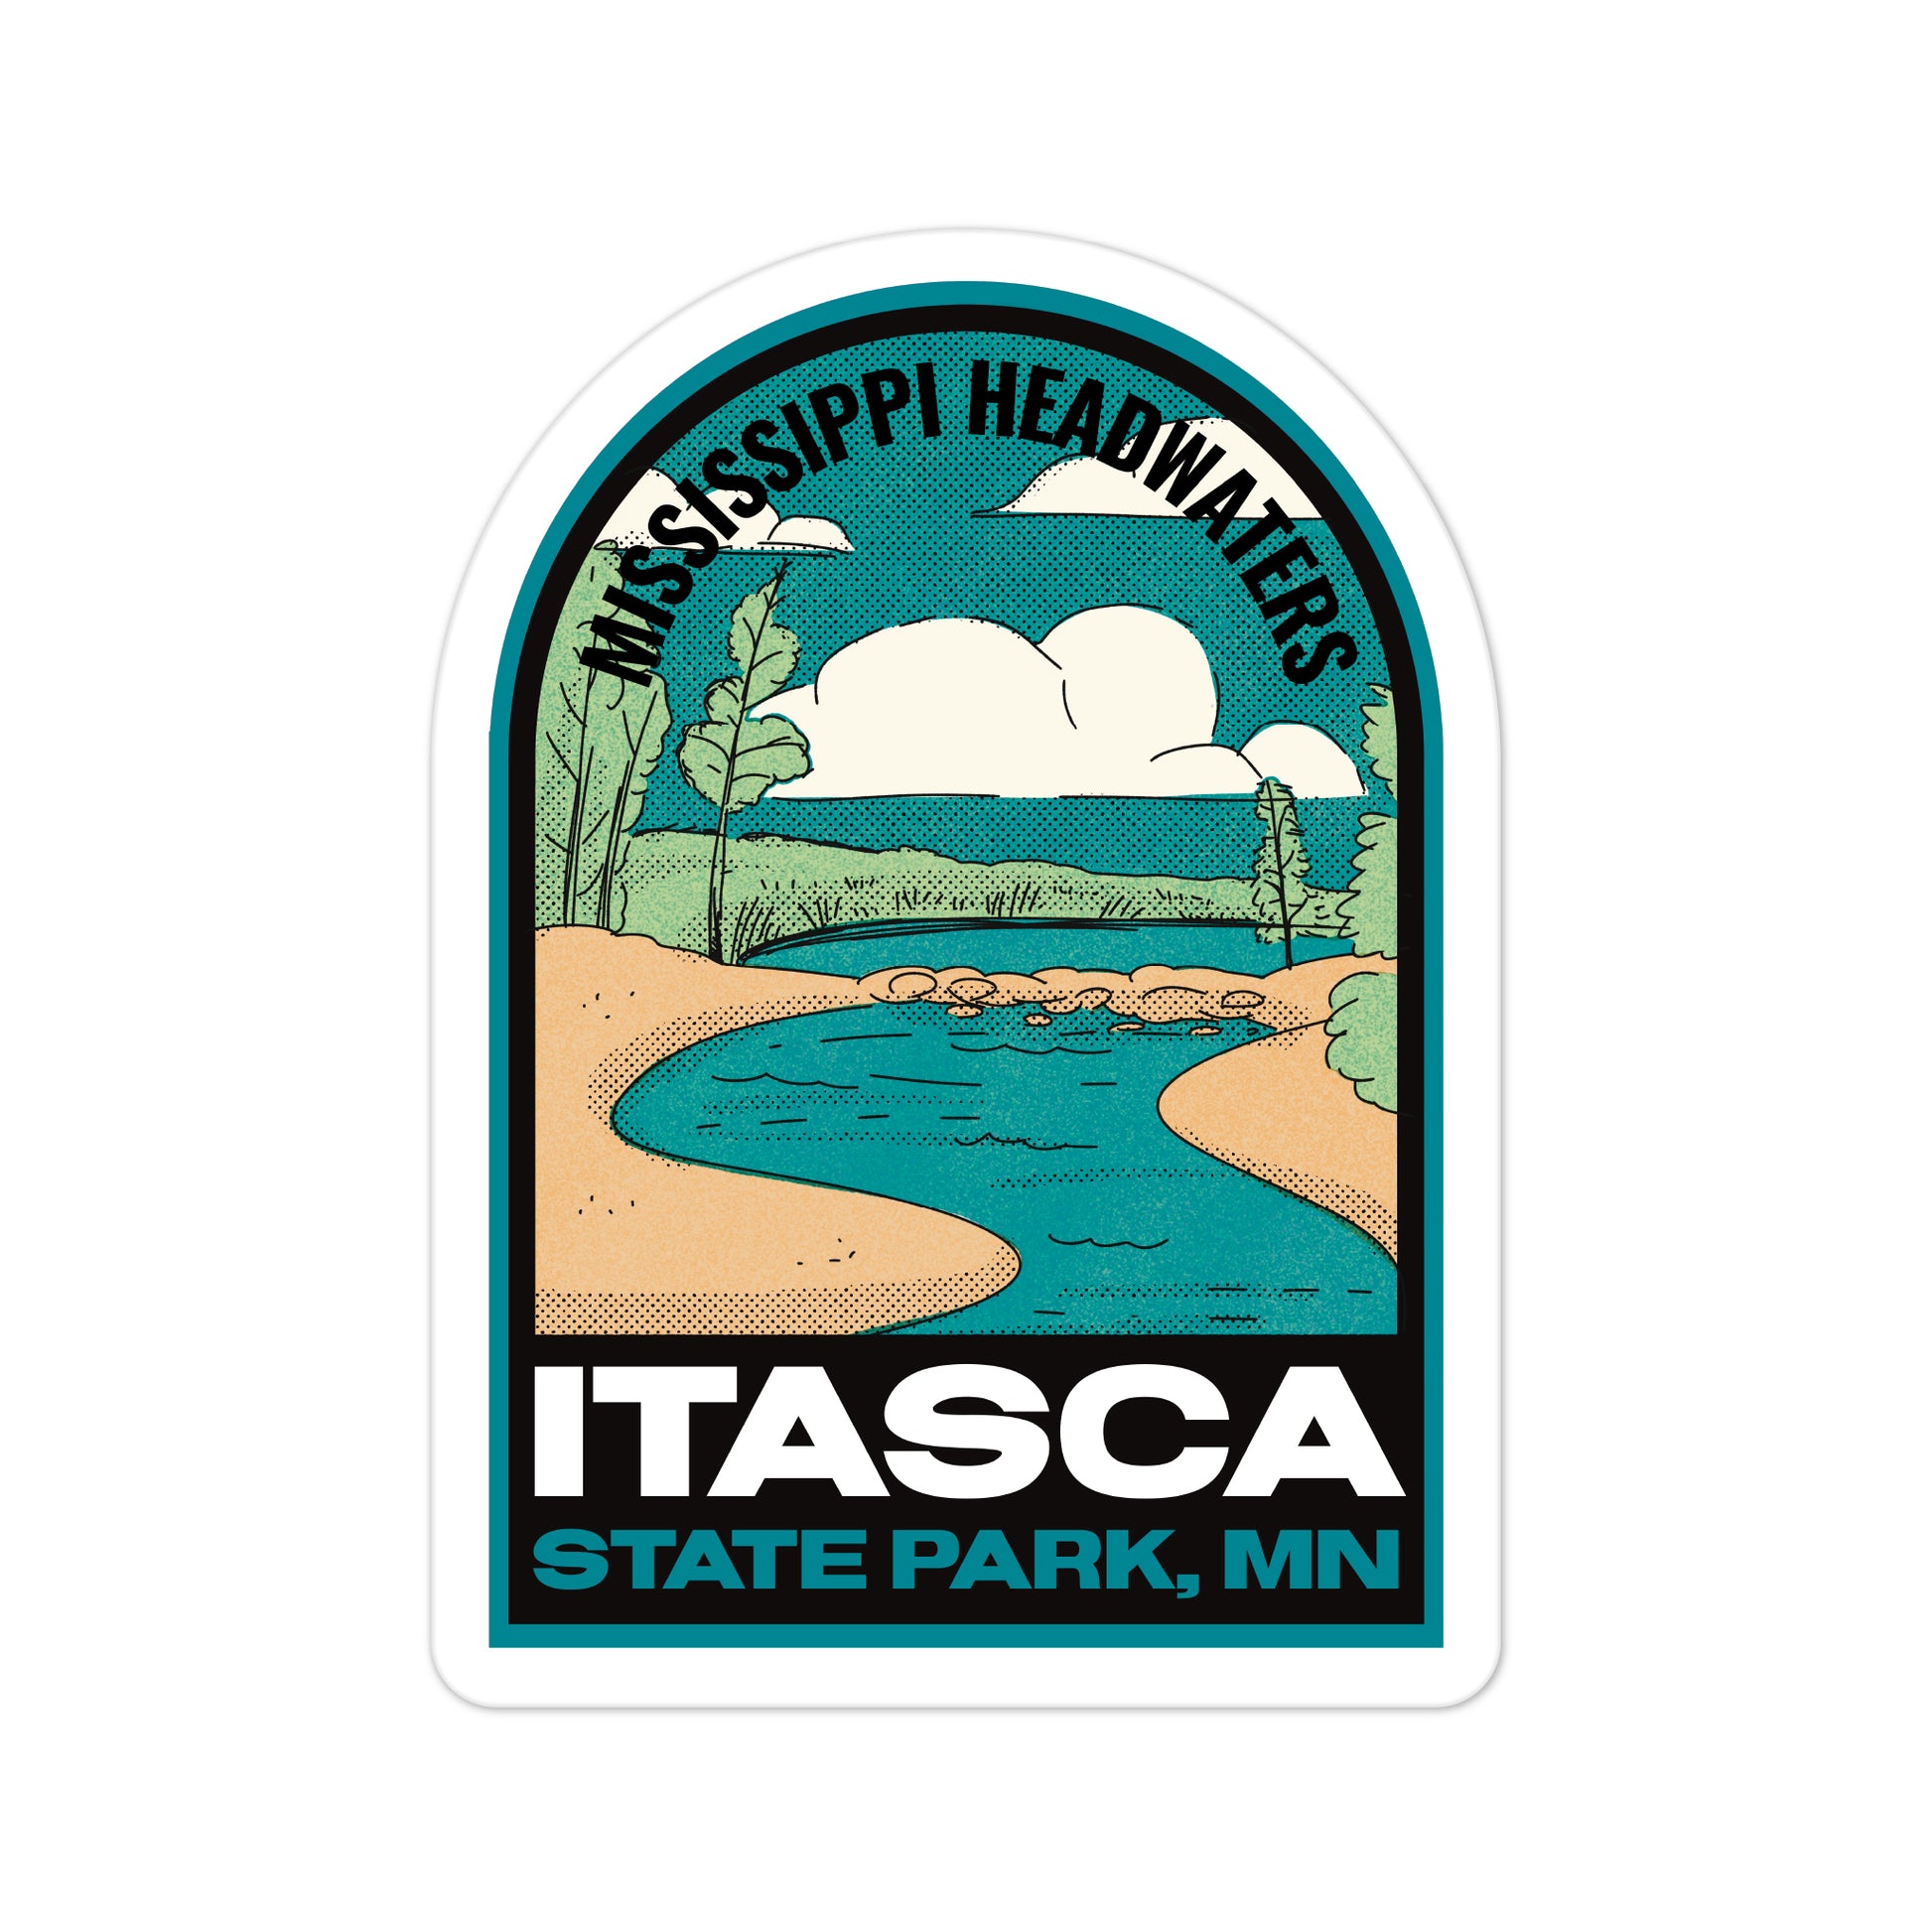 A sticker of Itasca State Park